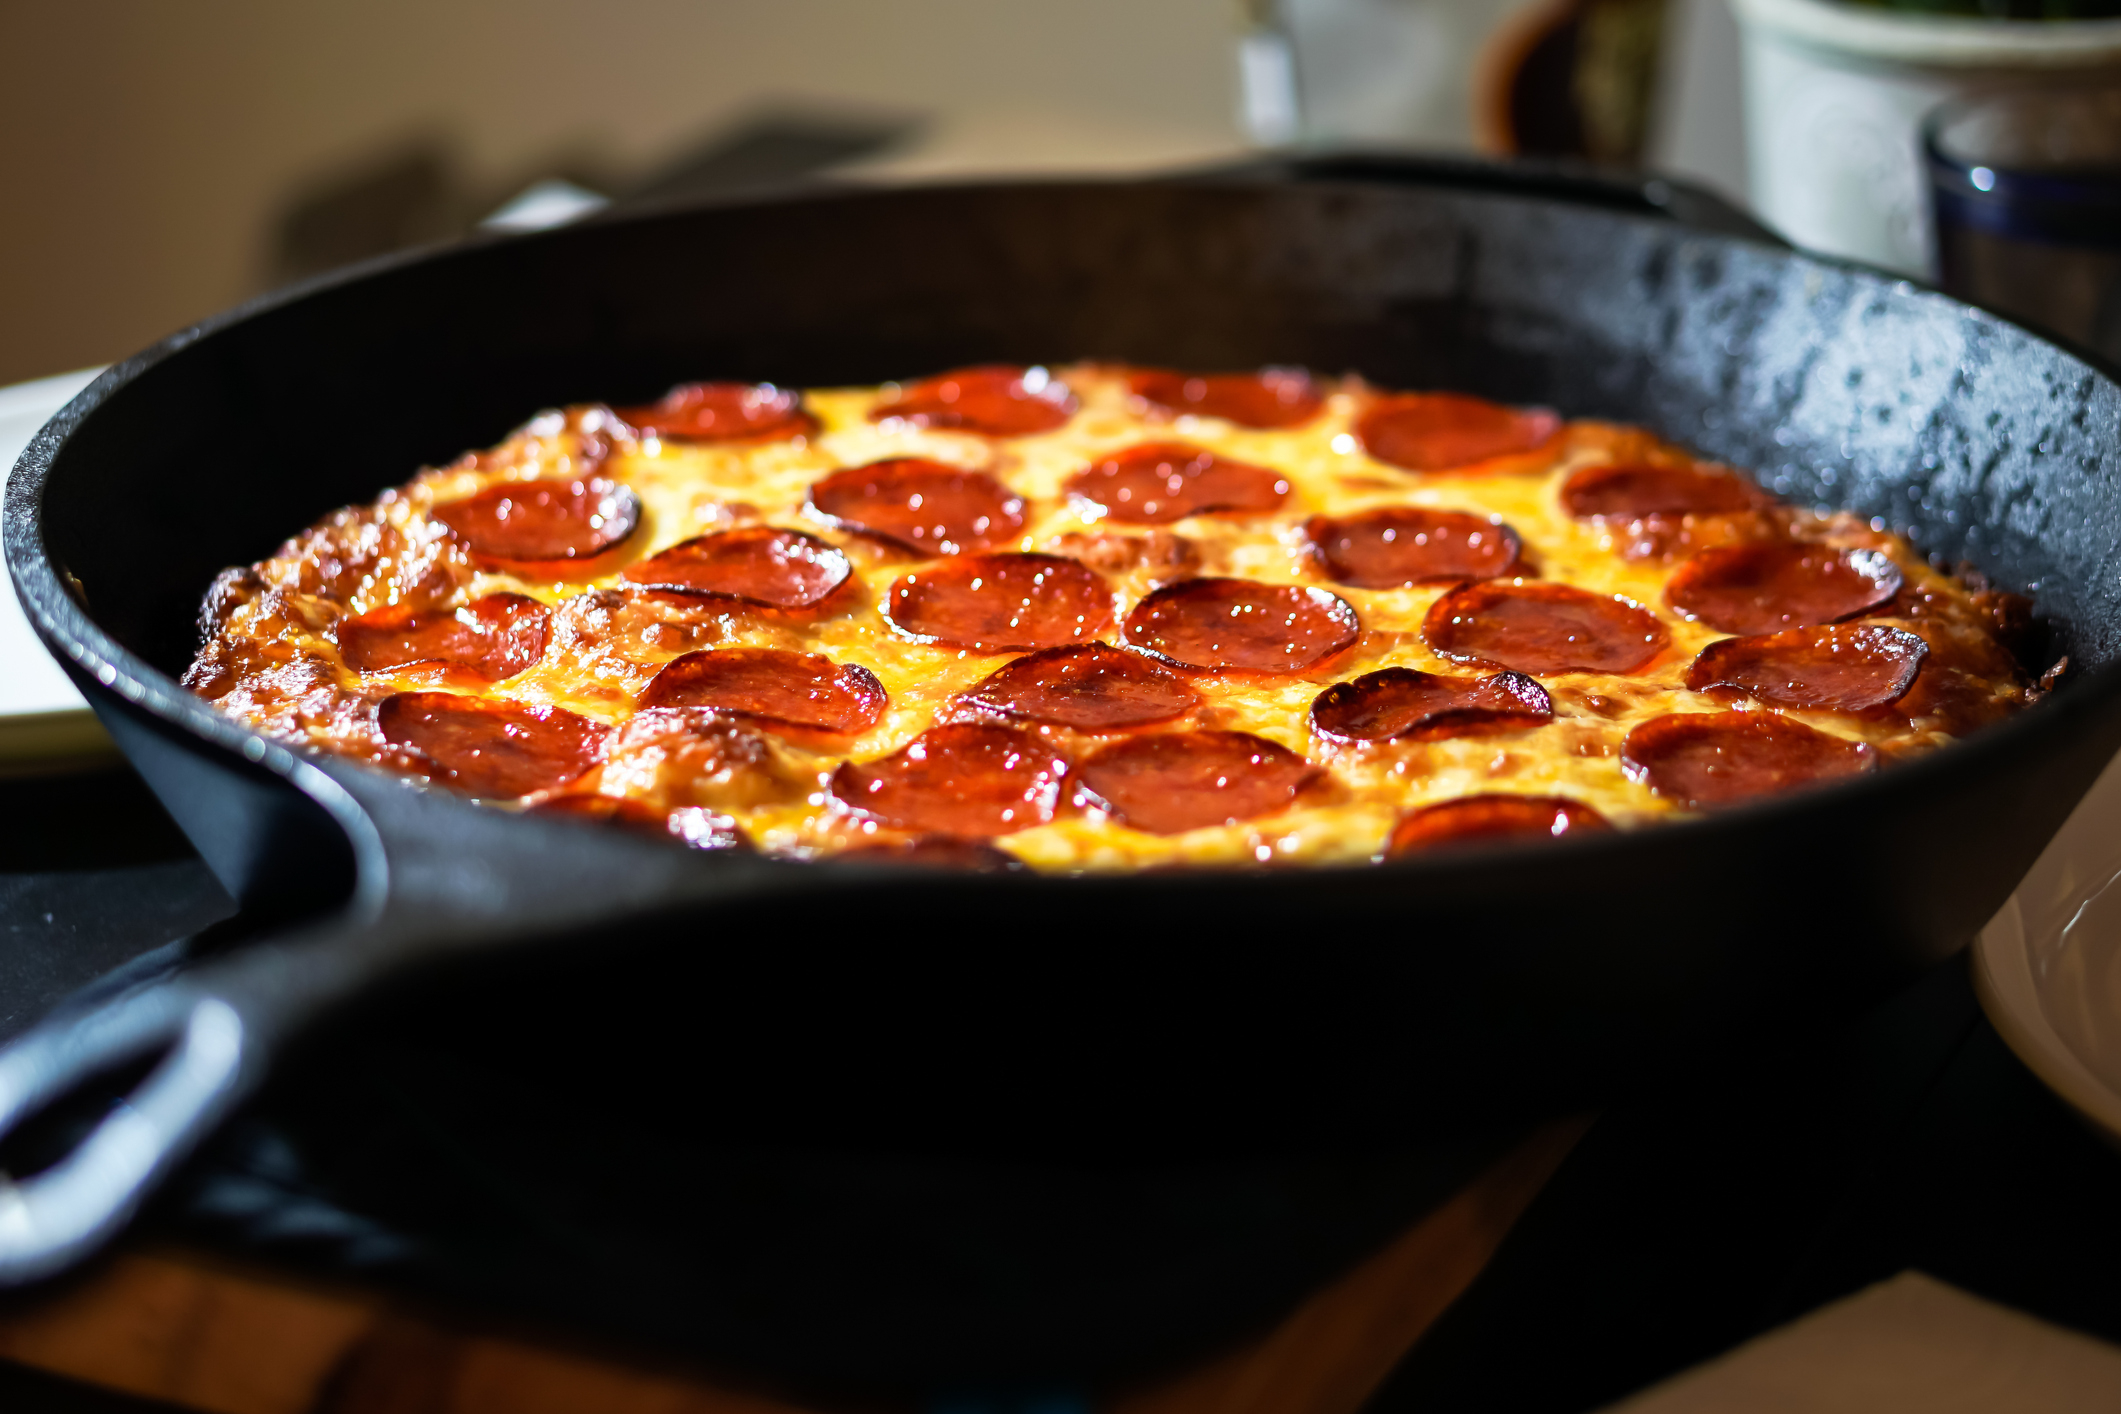 A pizza that was made in a cast-iron skillet is being shown